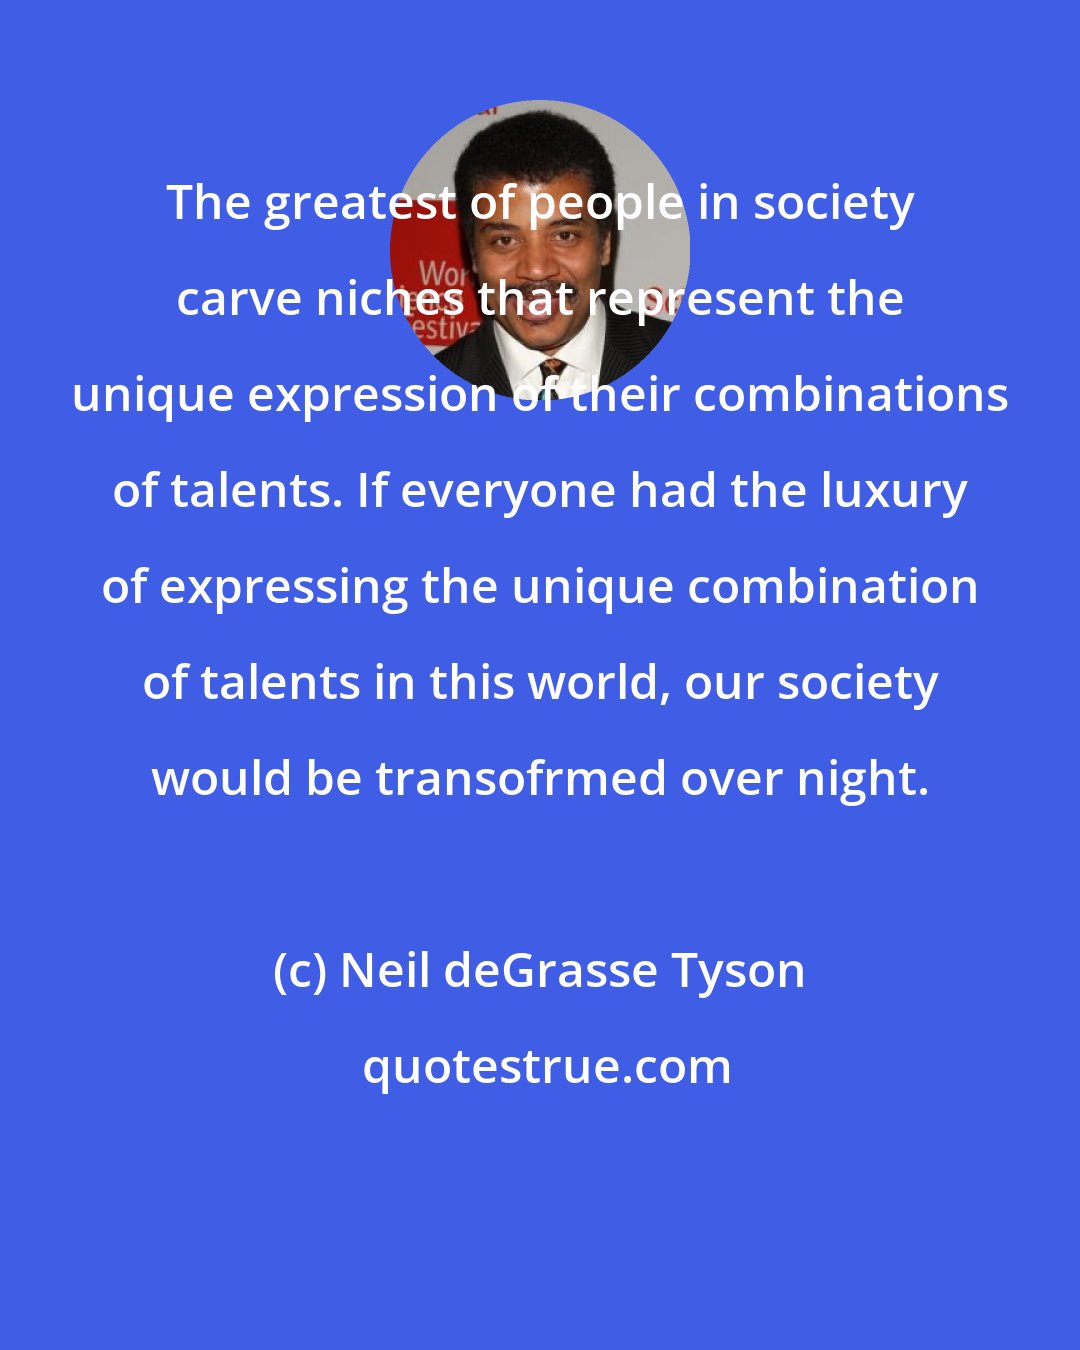 Neil deGrasse Tyson: The greatest of people in society carve niches that represent the unique expression of their combinations of talents. If everyone had the luxury of expressing the unique combination of talents in this world, our society would be transofrmed over night.